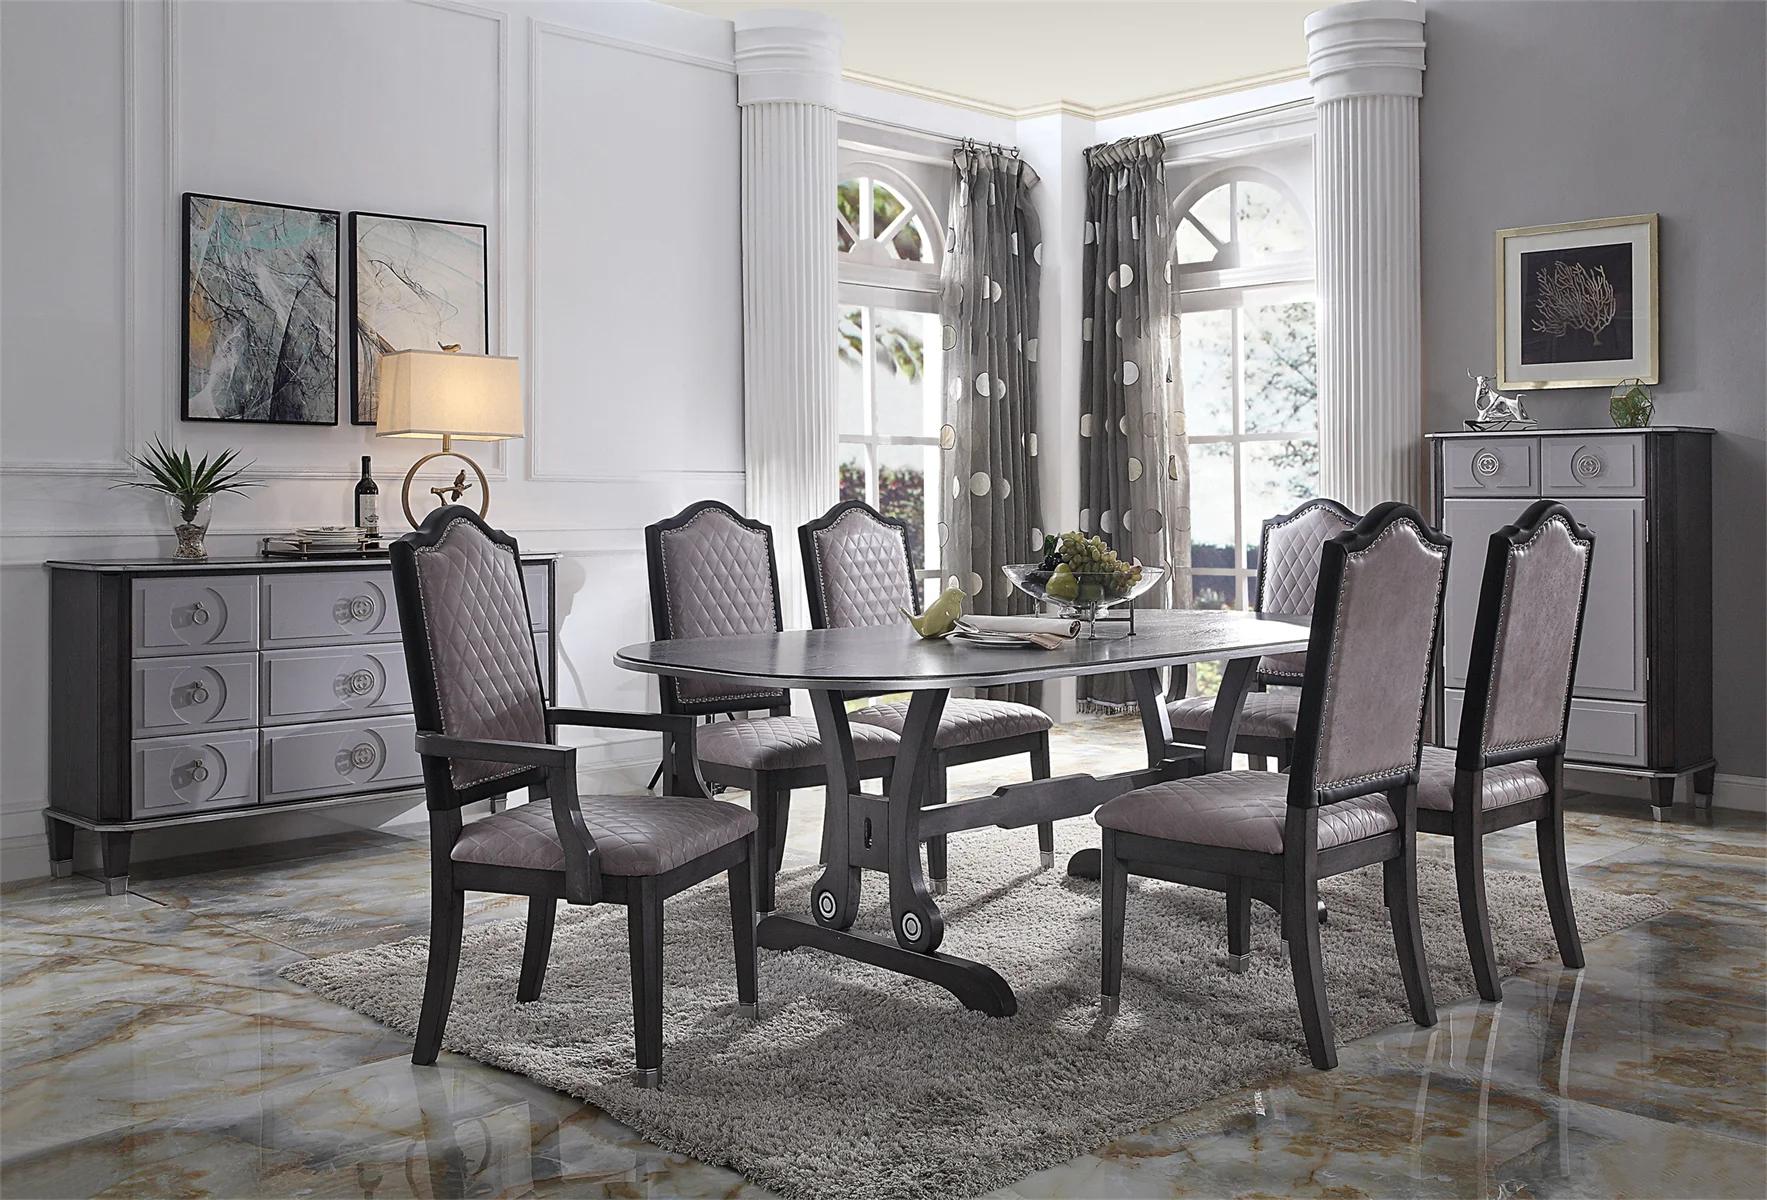 Transitional Dining Room Set House Beatrice 68810-8pcs in Charcoal Fabric